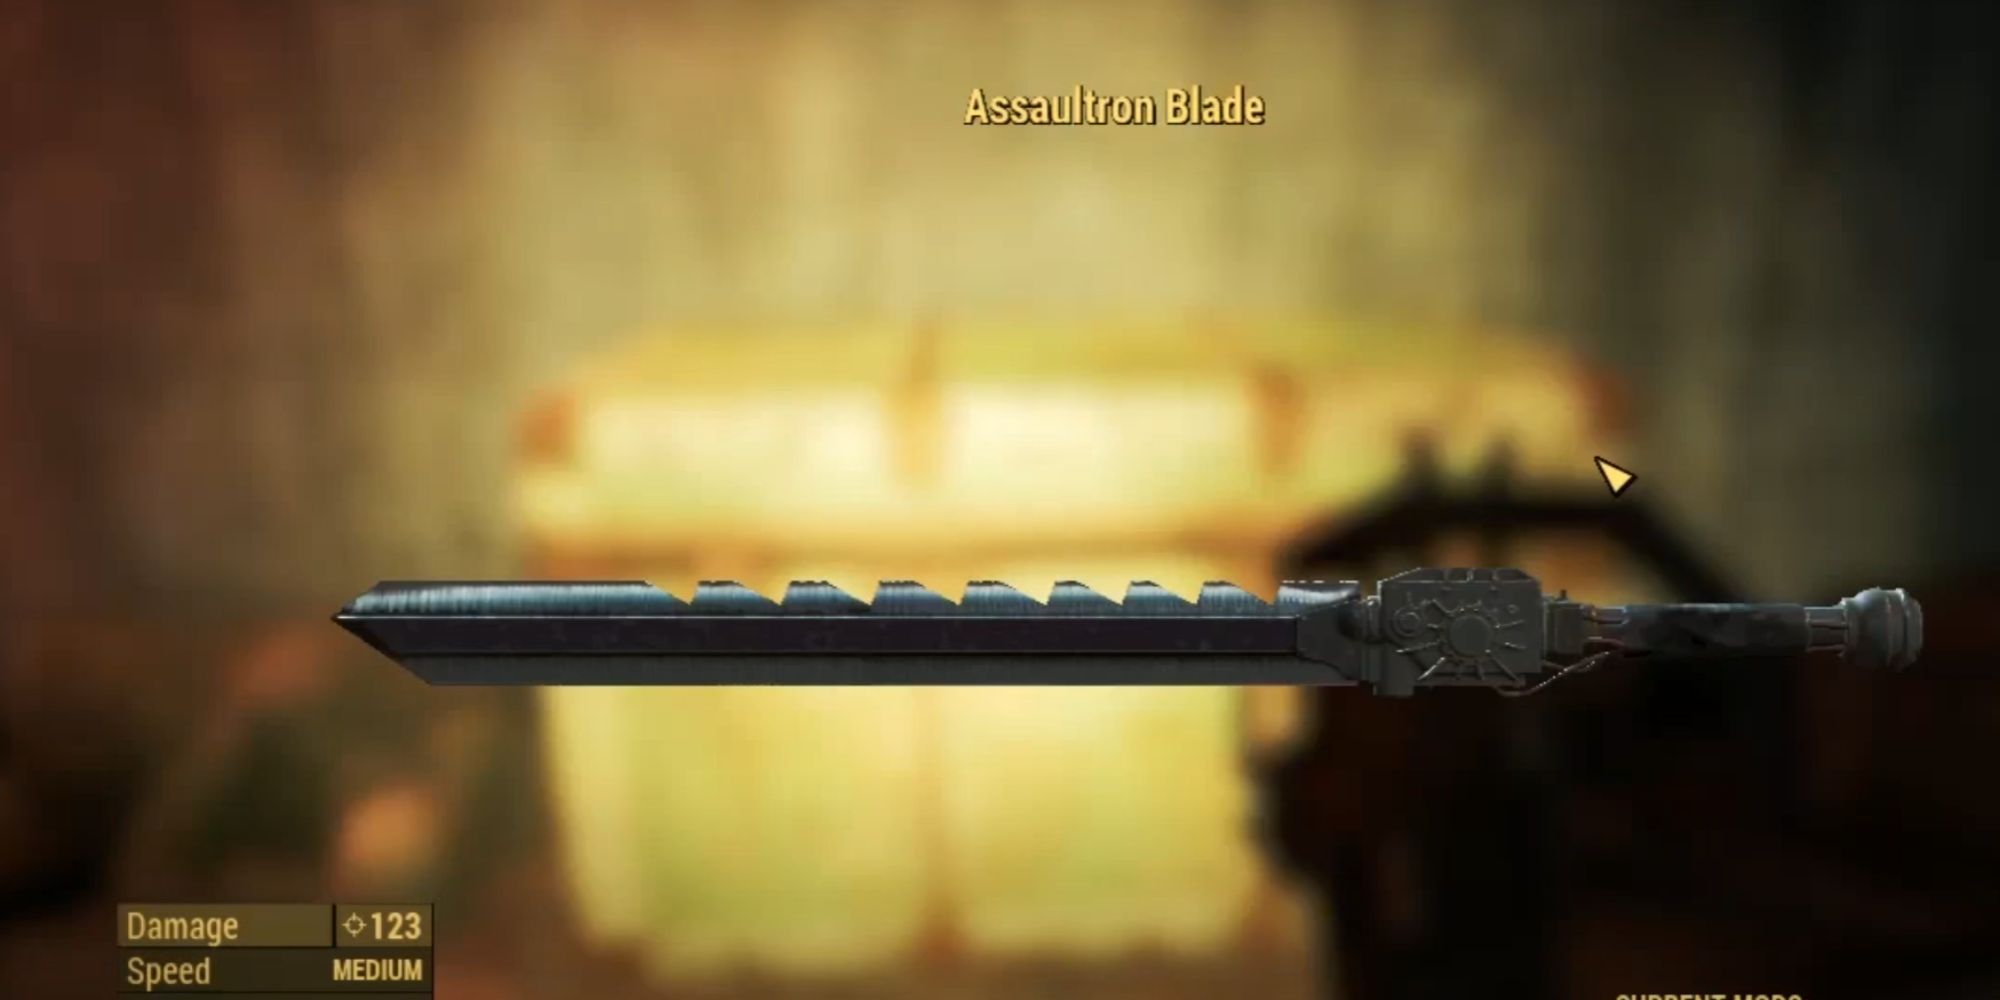 A screenshot showing the stats of the Assaultron Blade weapon.